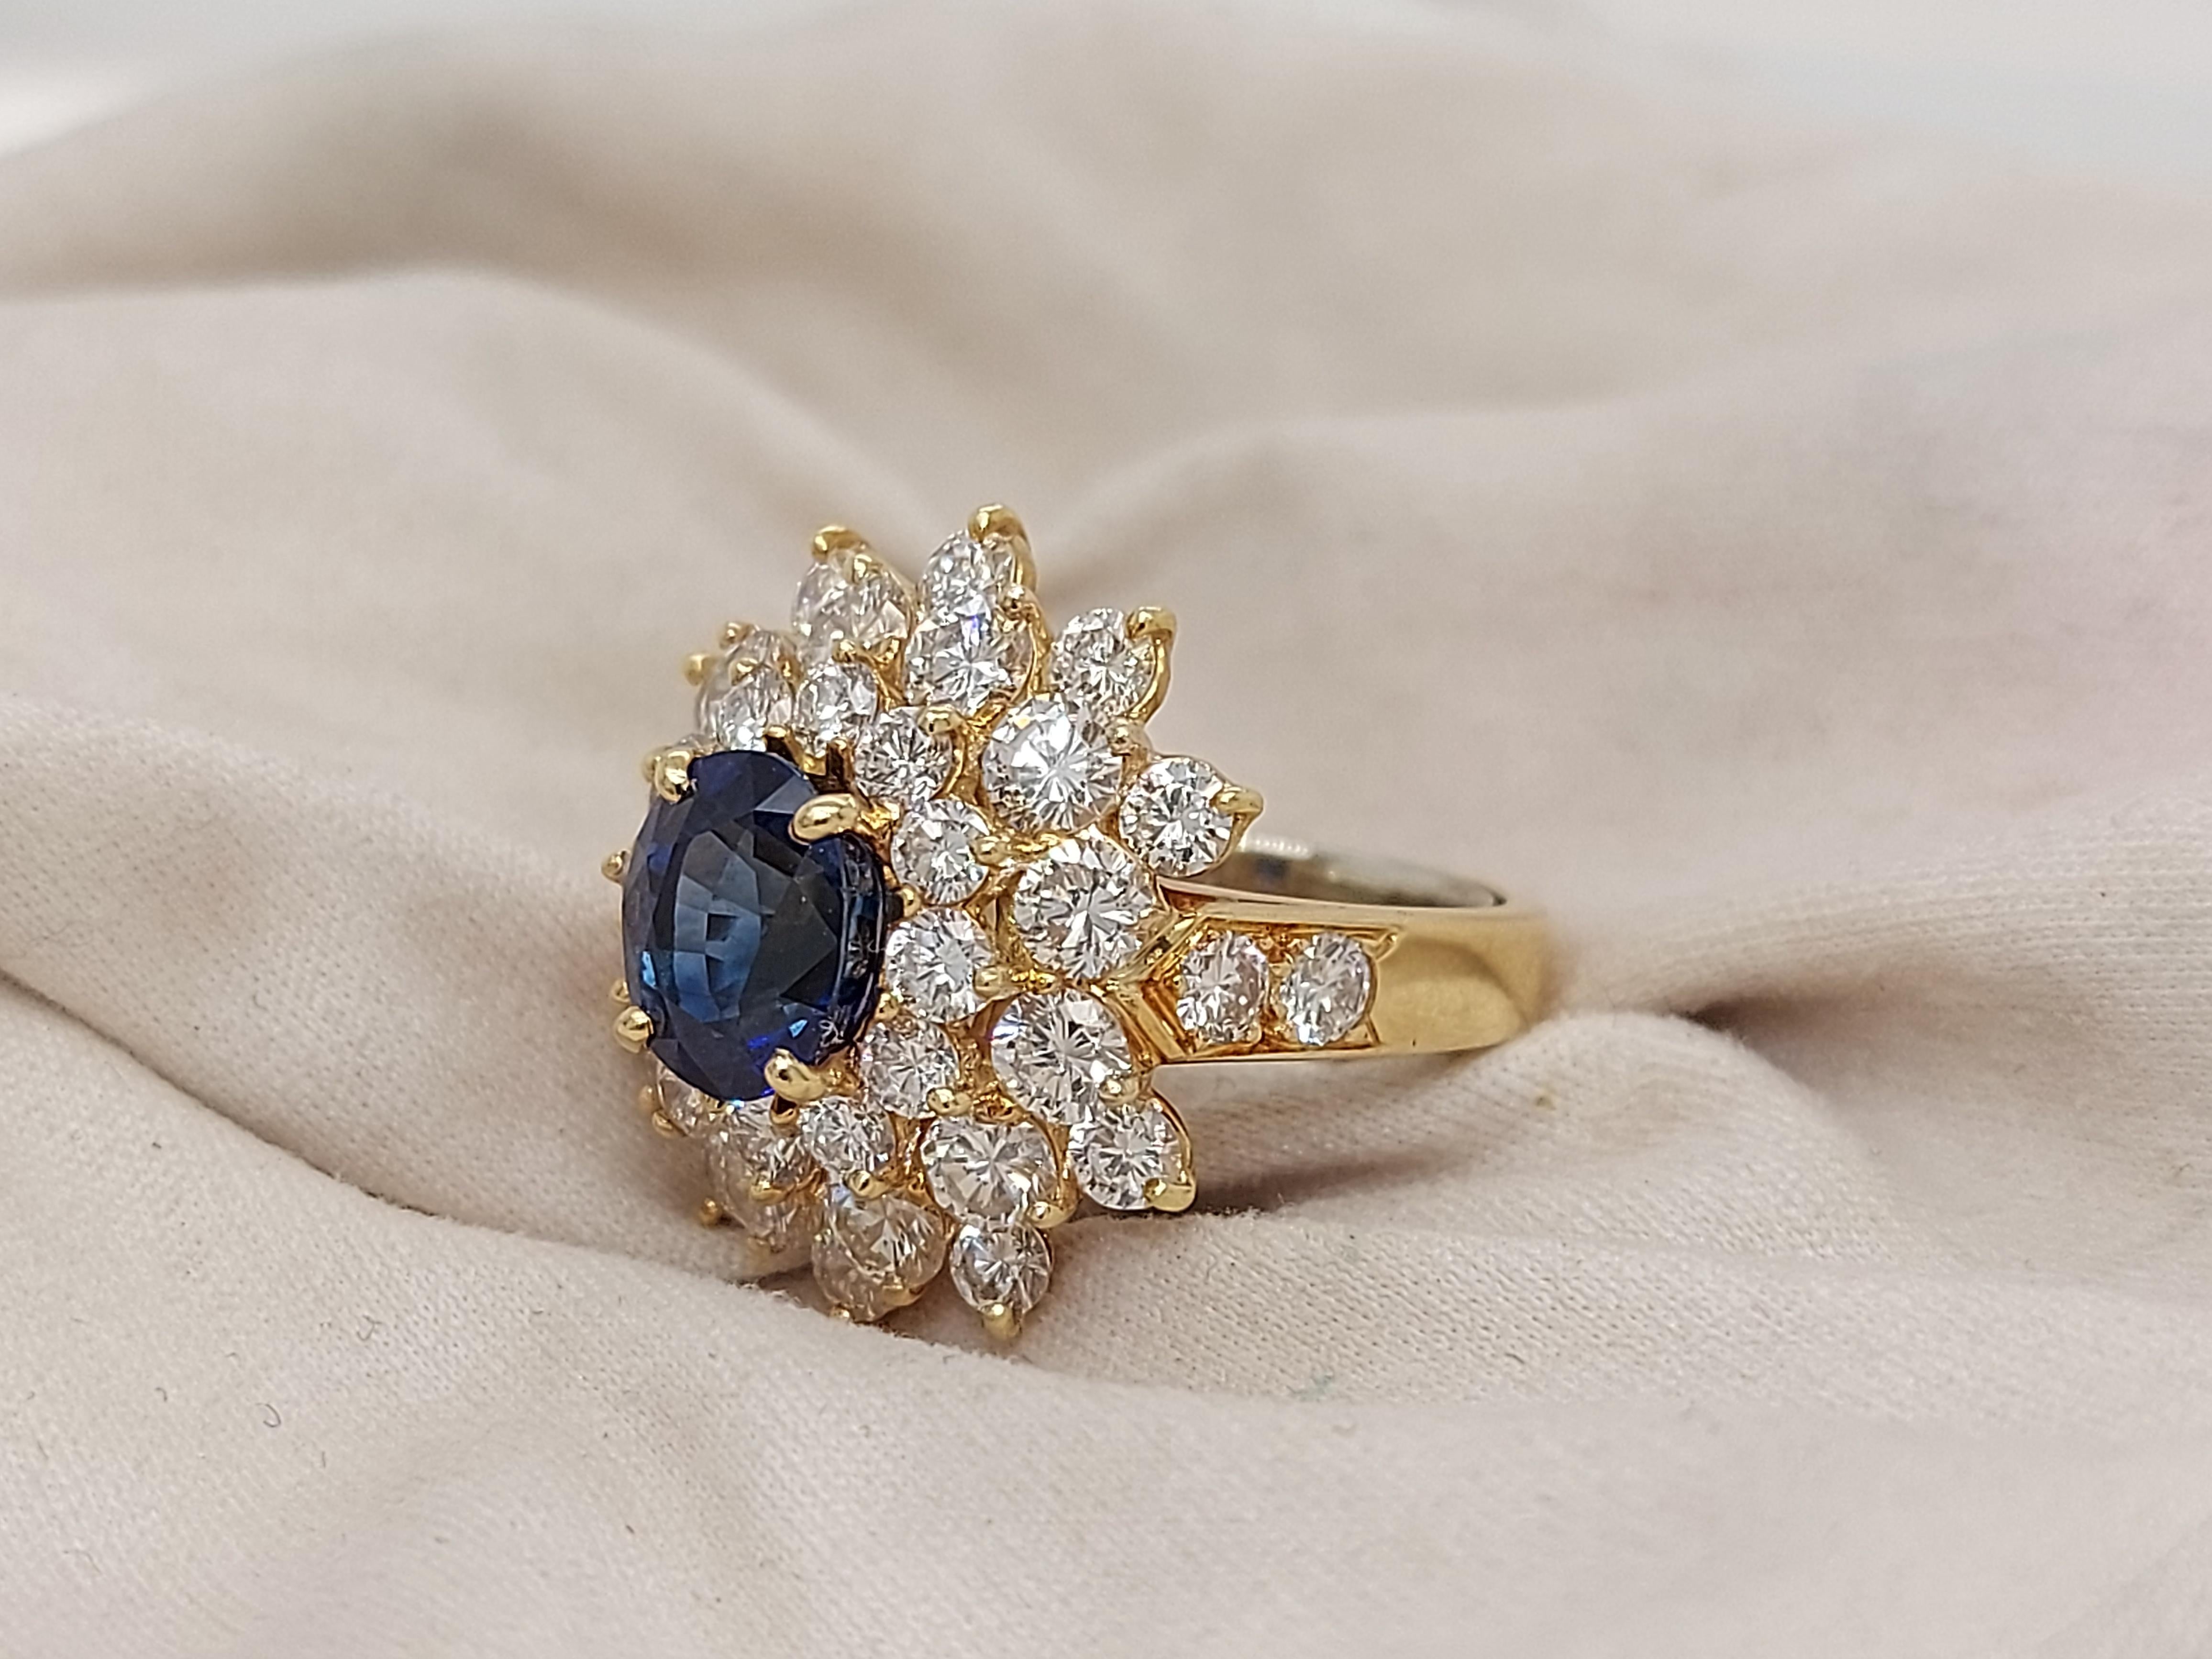 18 kt Yellow Gold Ring with 2ct Sapphire and 2.8ct Diamonds, Estate Sultan Oman For Sale 3